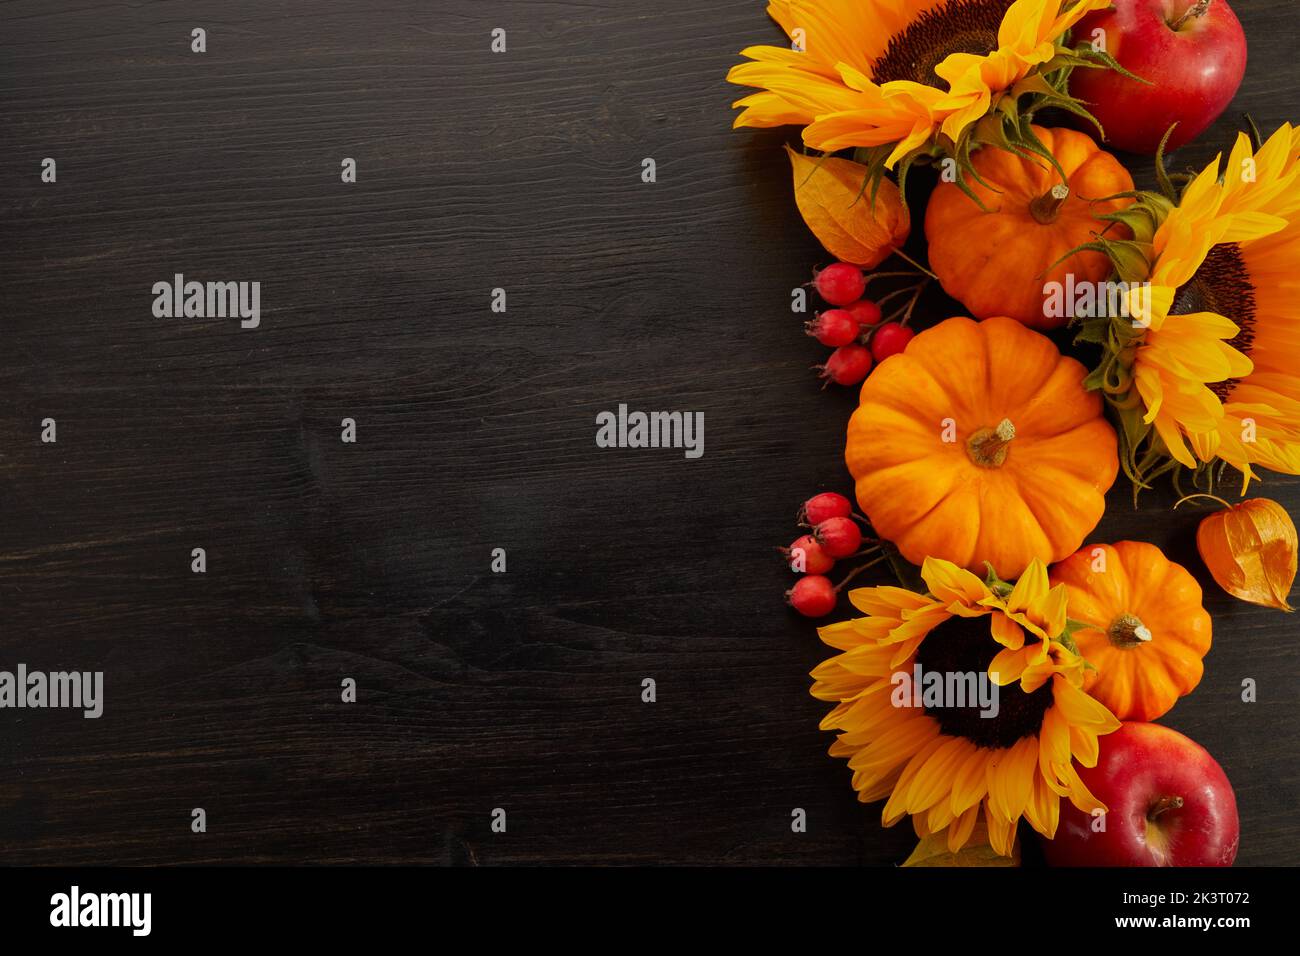 Pumpkin and sunflowers over old wooden background with copy space. Autumn background decoration. Stock Photo